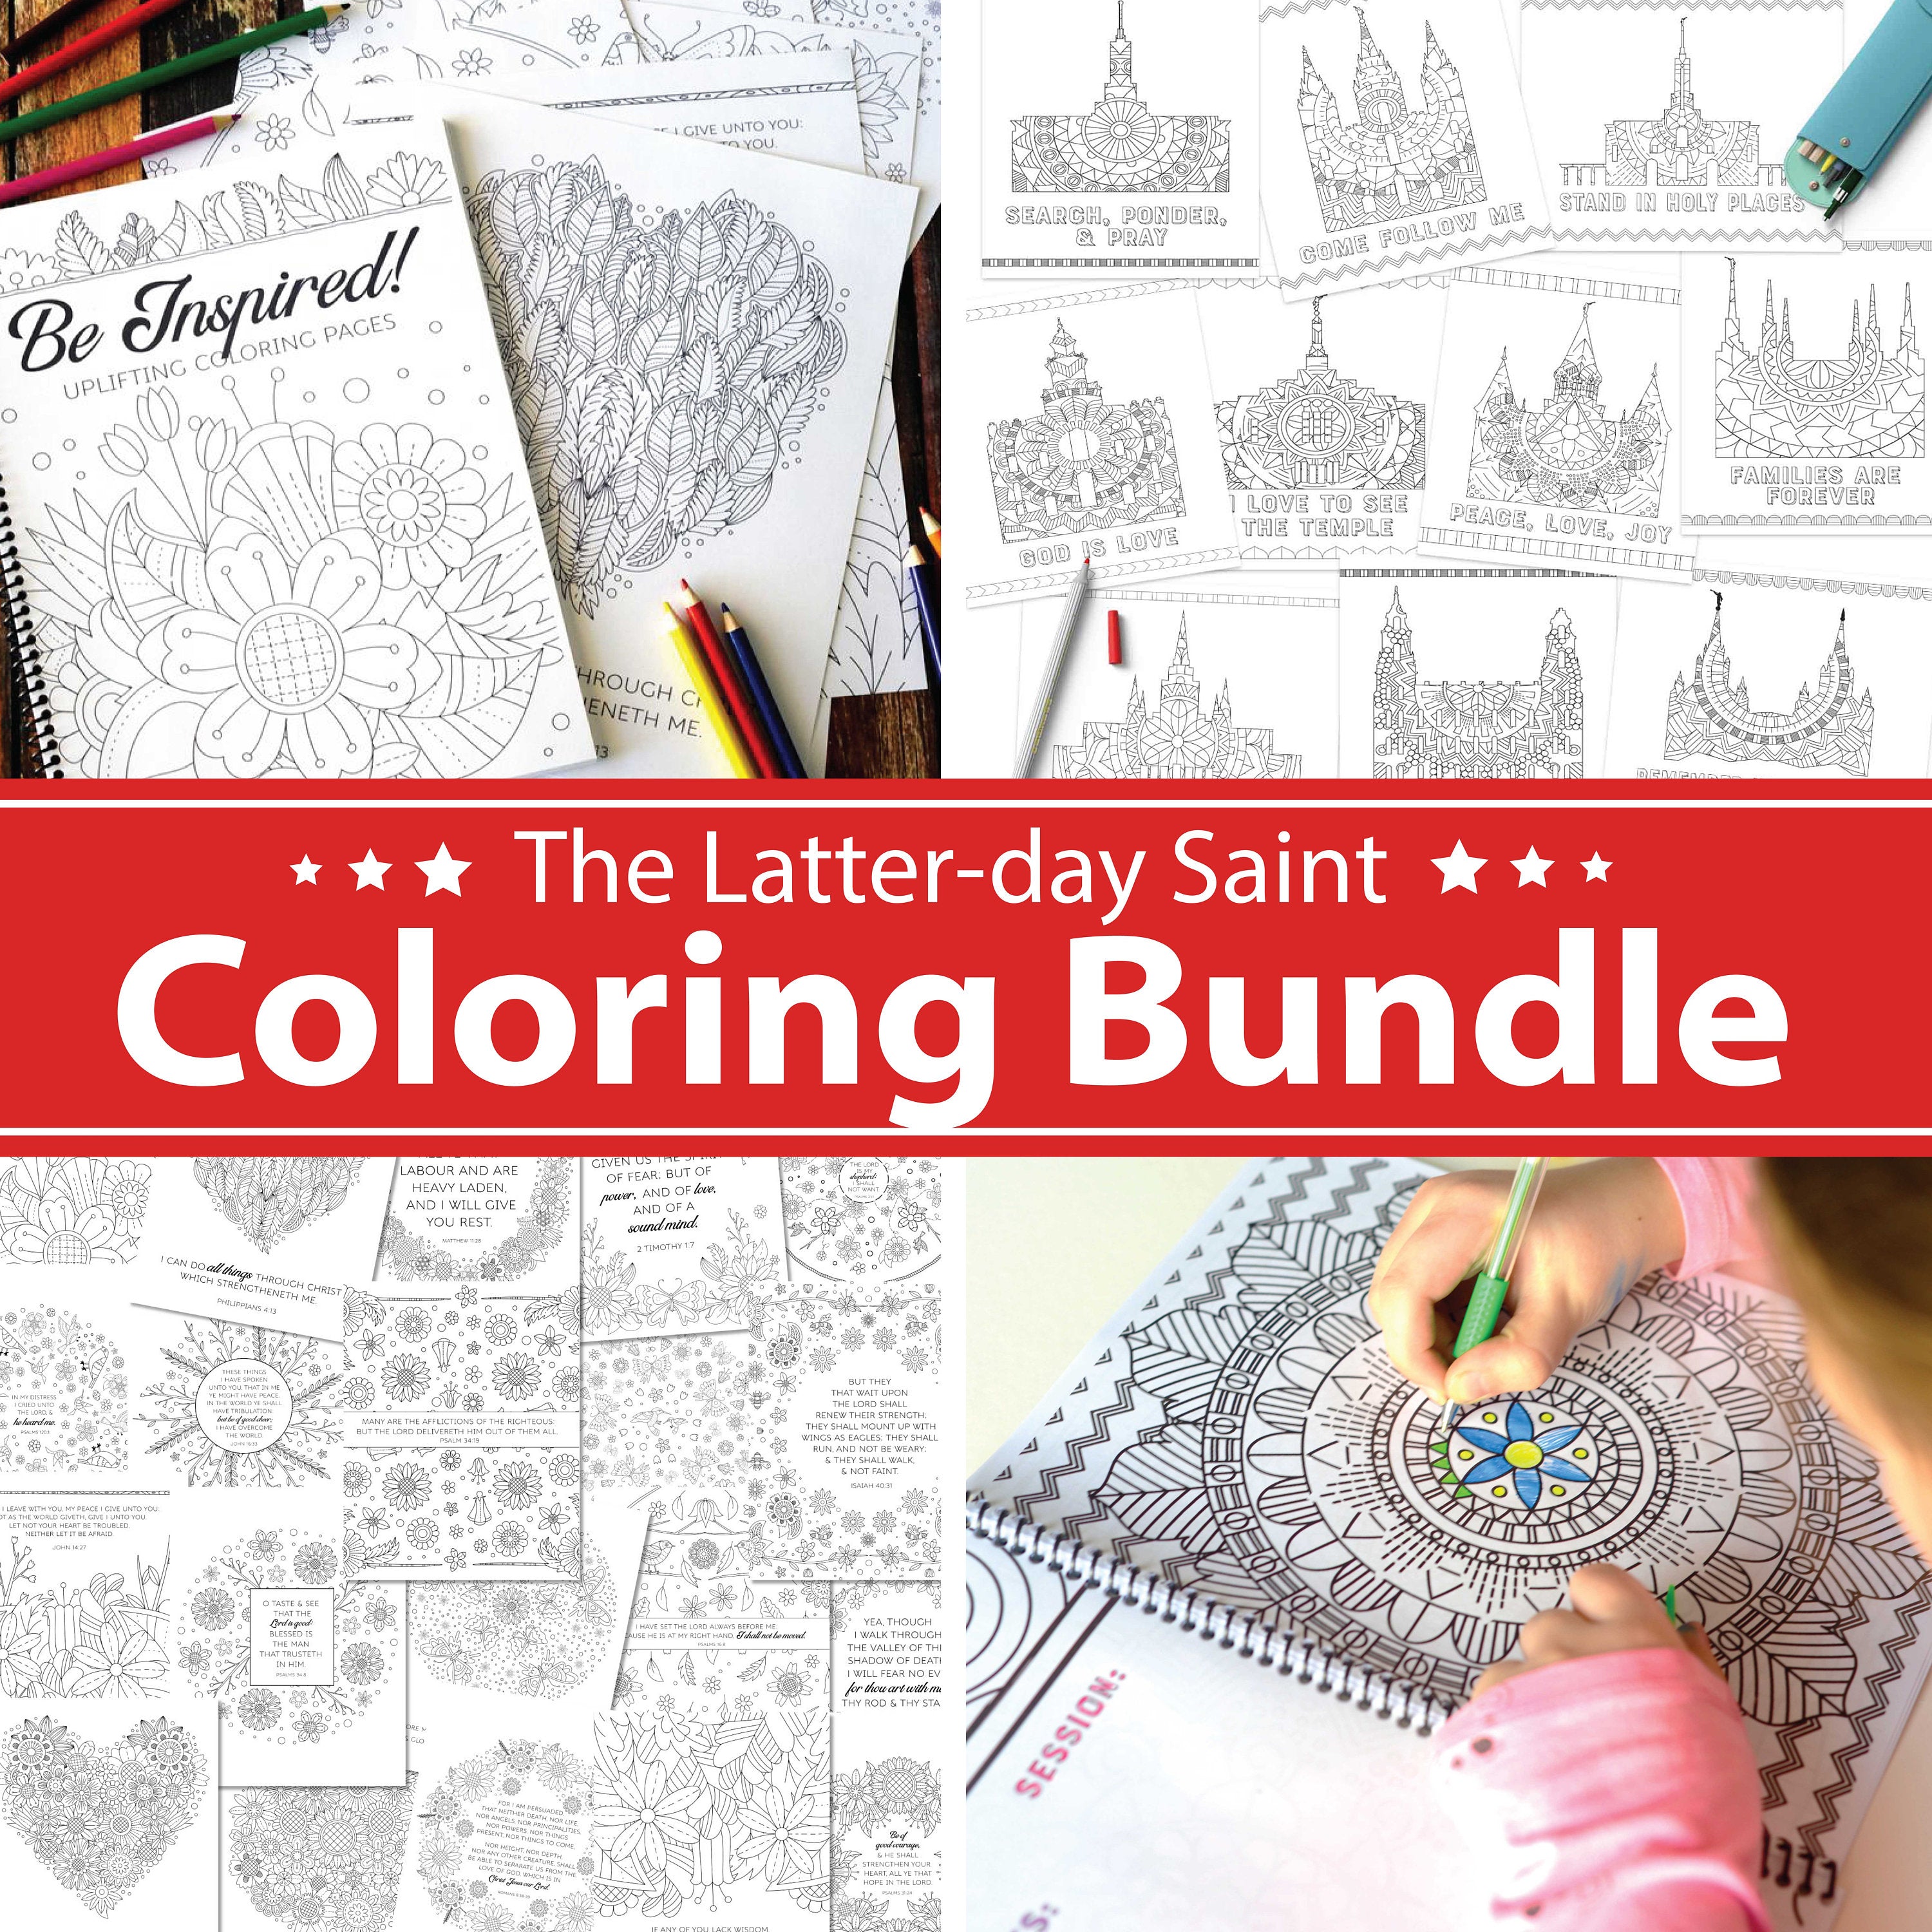  10 Pack Adult Coloring Book Super Set - Bundle with 10 Adult  Coloring Books for Women, Men Featuring Mandalas and More